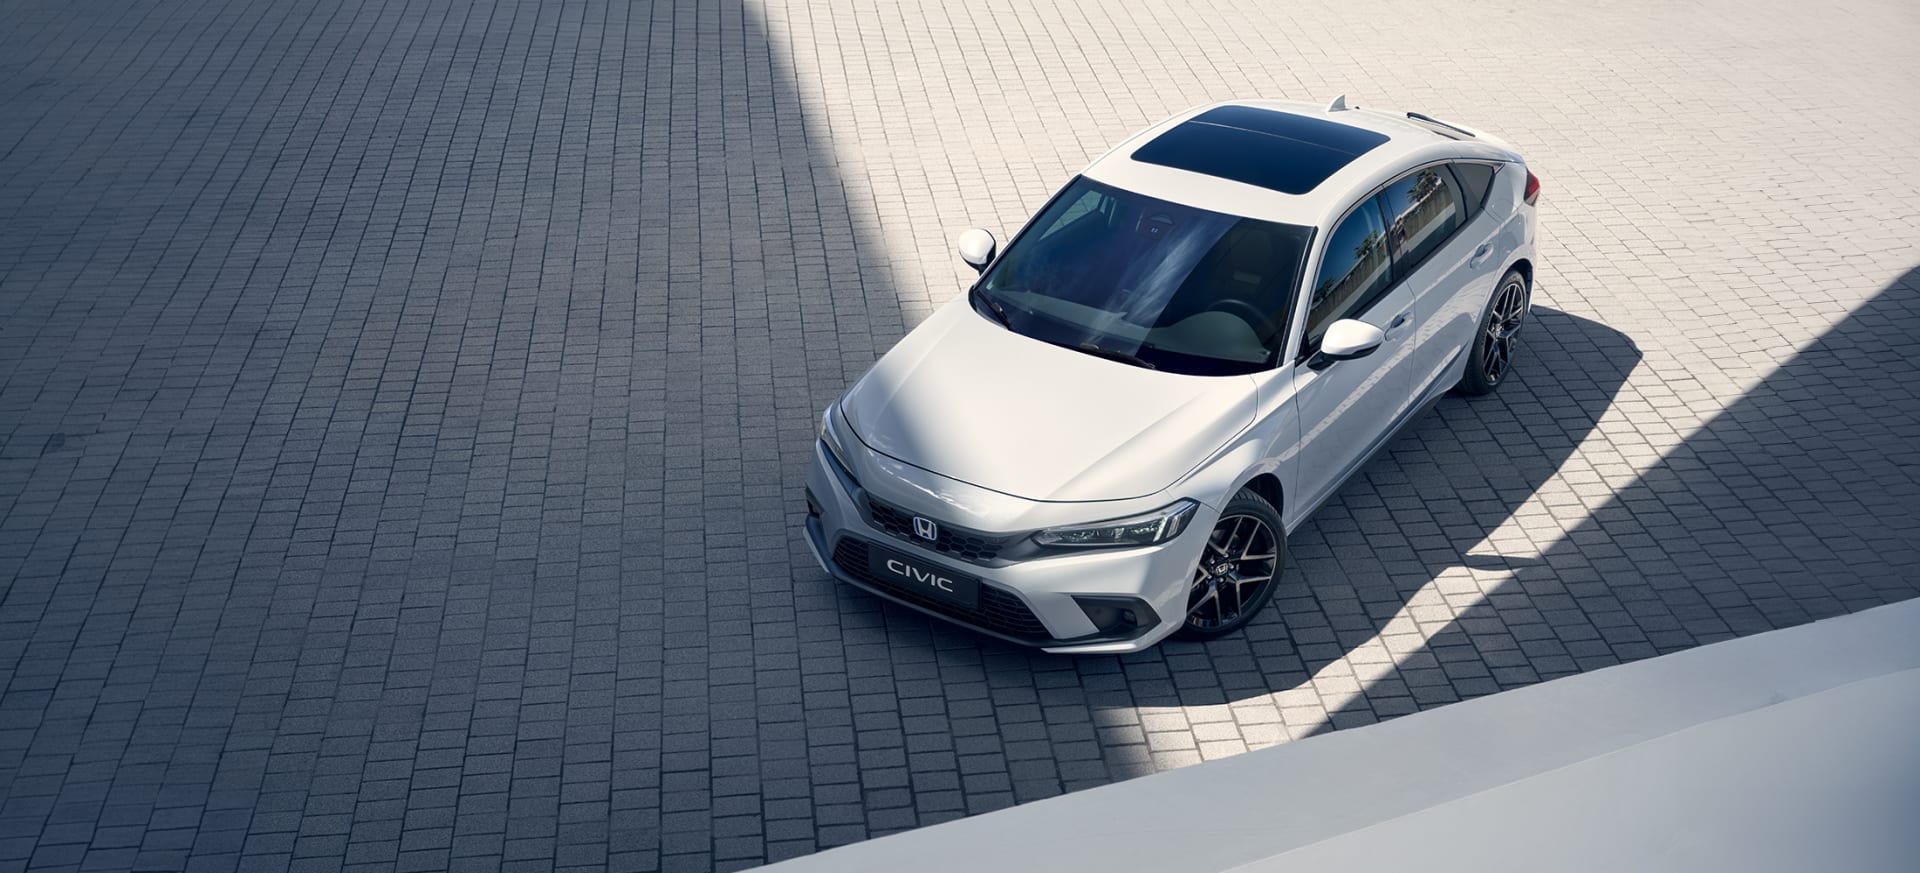 Civic e:HEV | £369 per month and £369 deposit